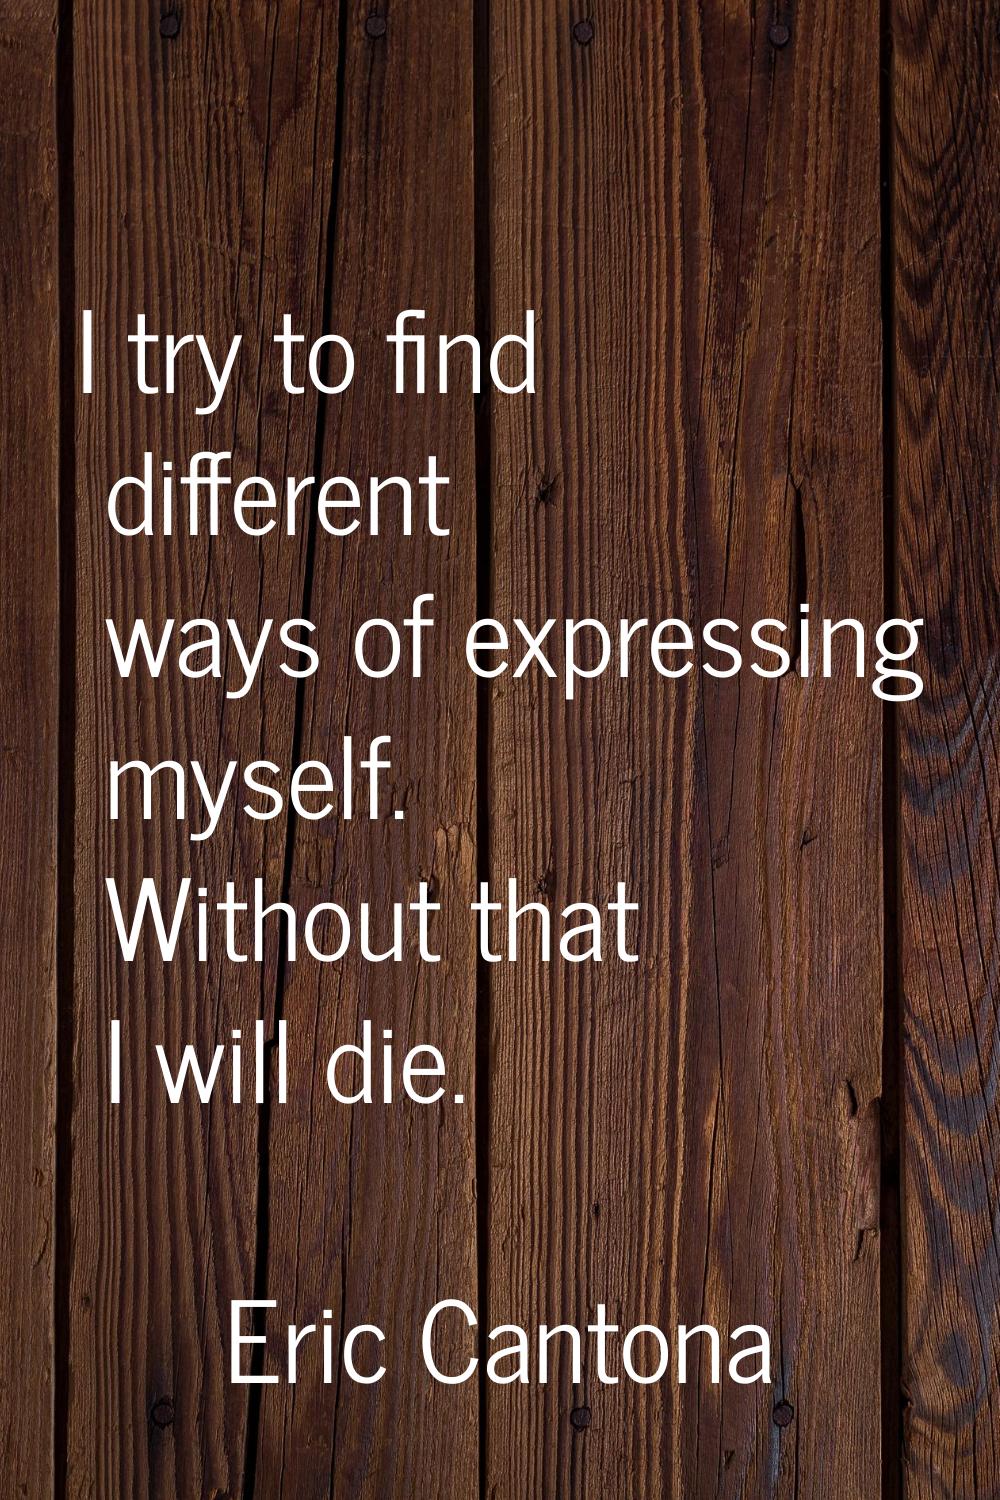 I try to find different ways of expressing myself. Without that I will die.